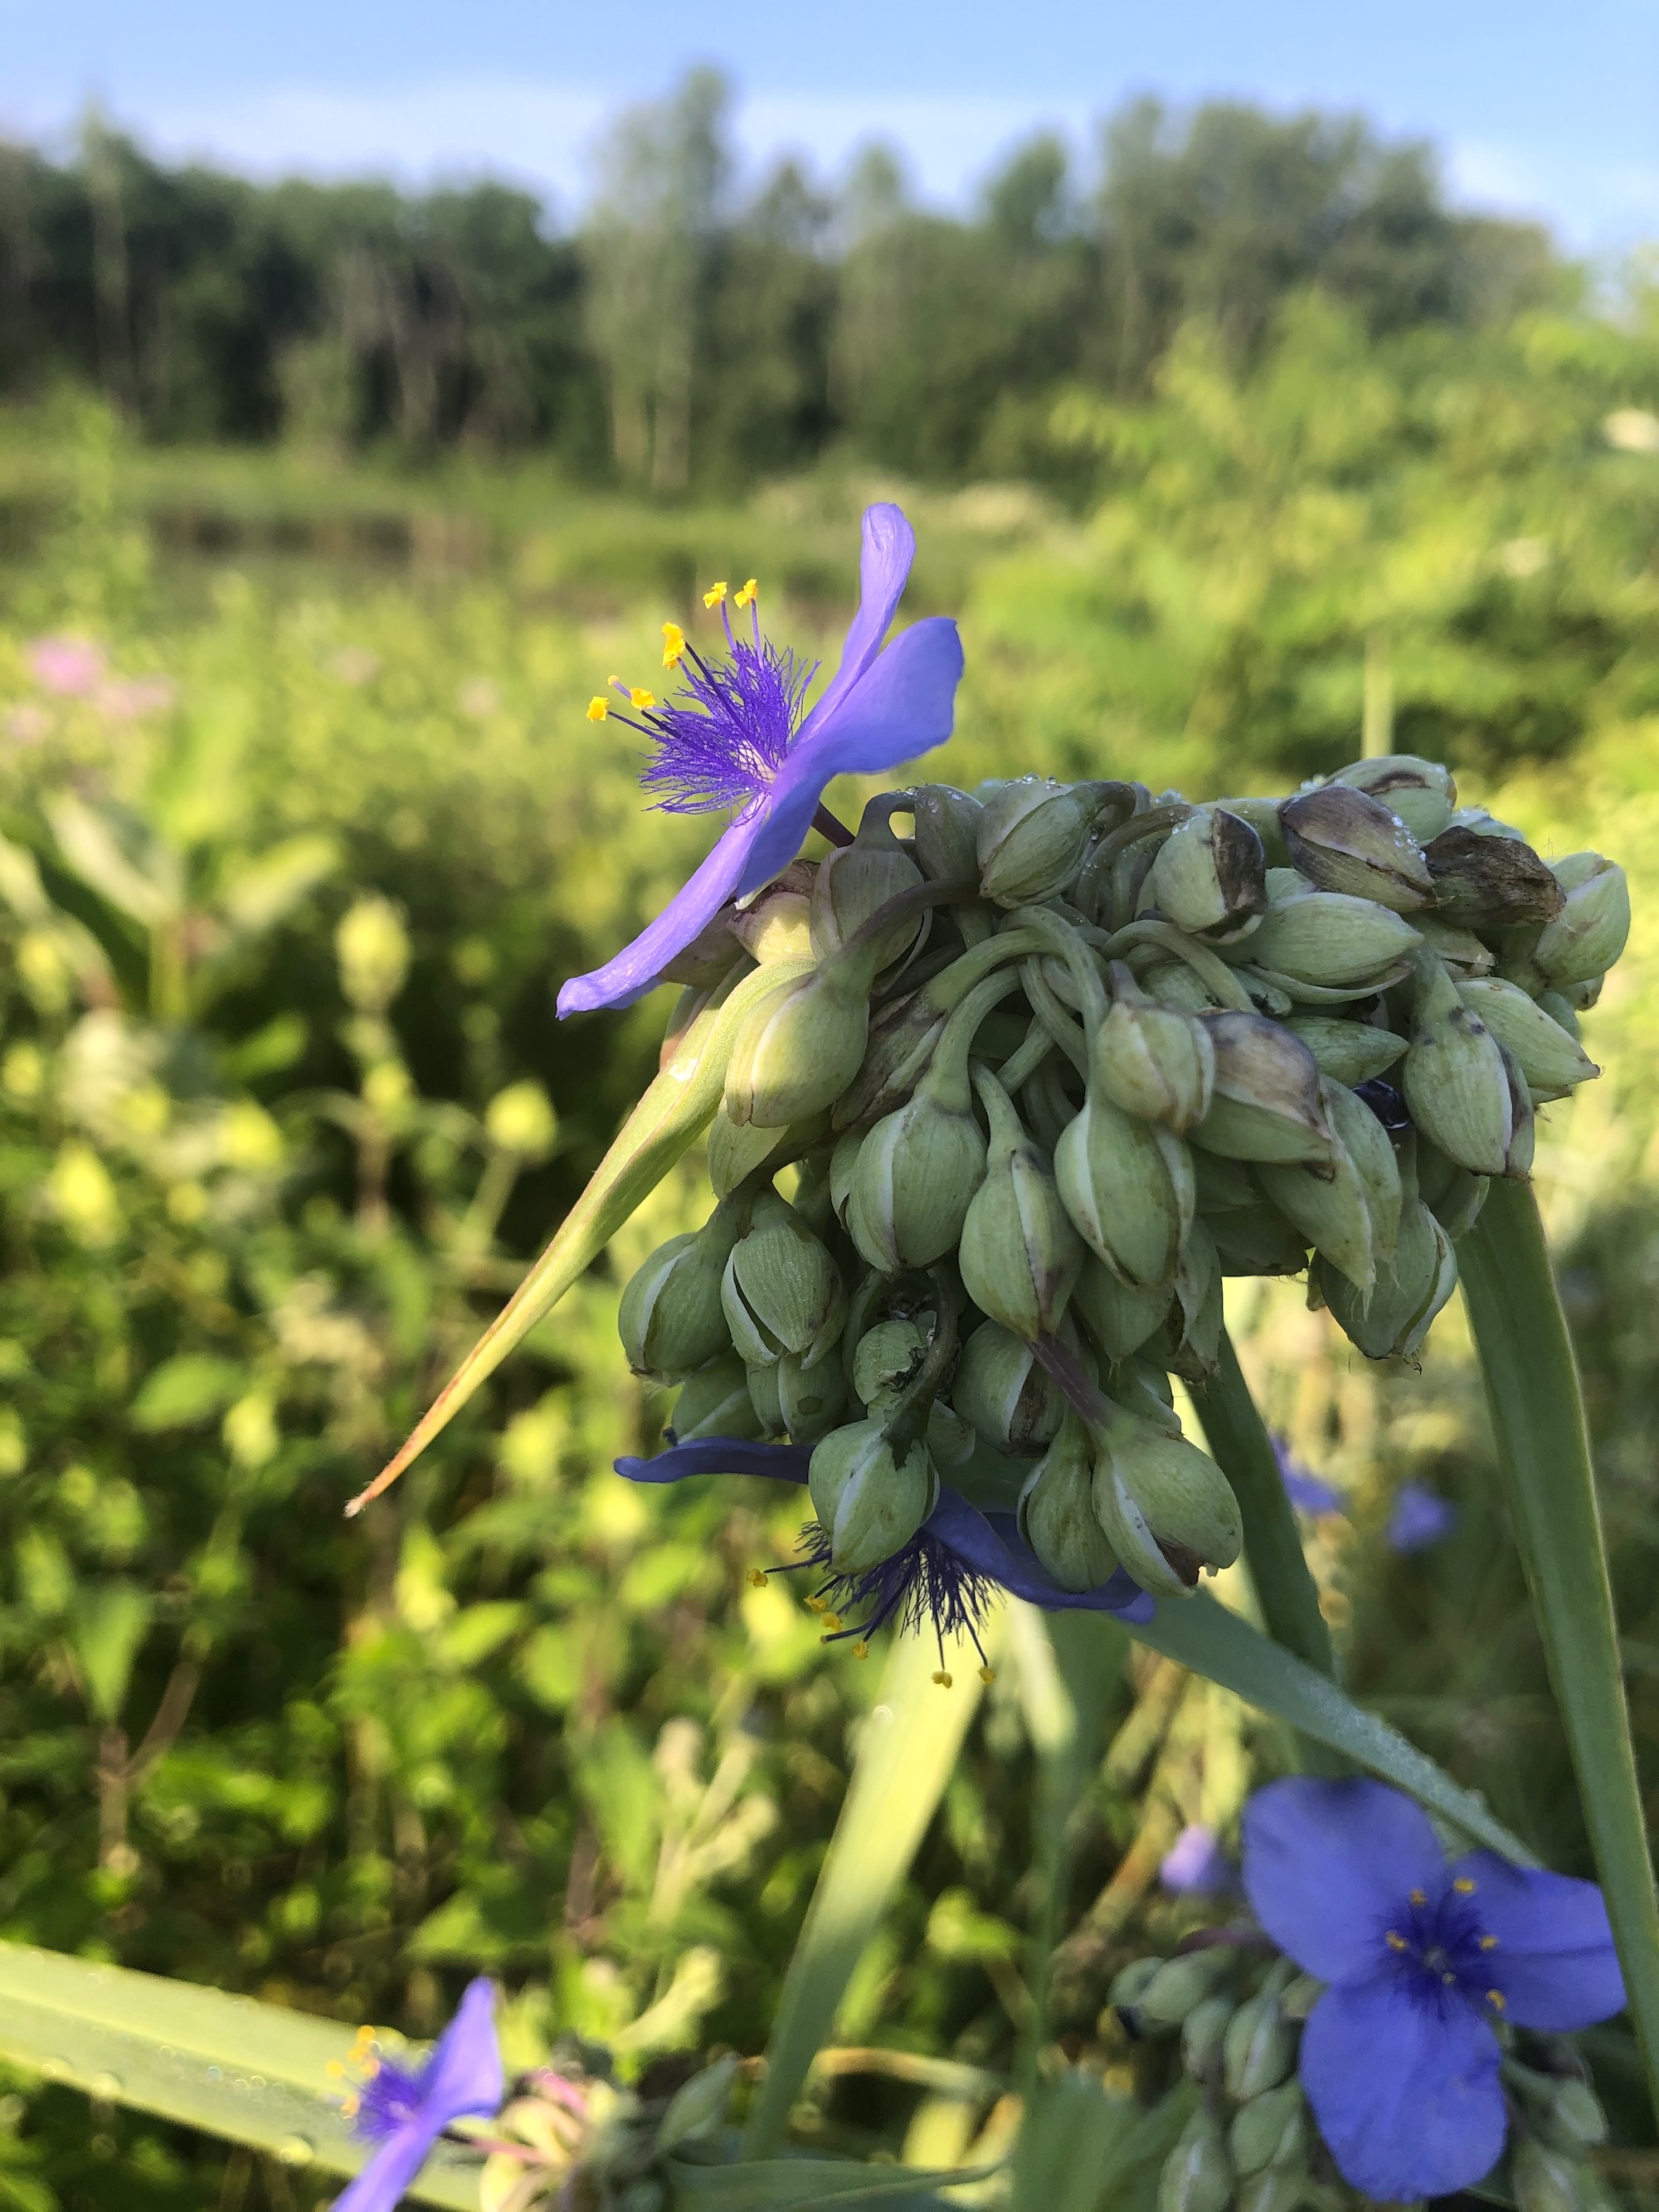 Spiderwort on bank of Marion Dunn Pond July 3, 2020.